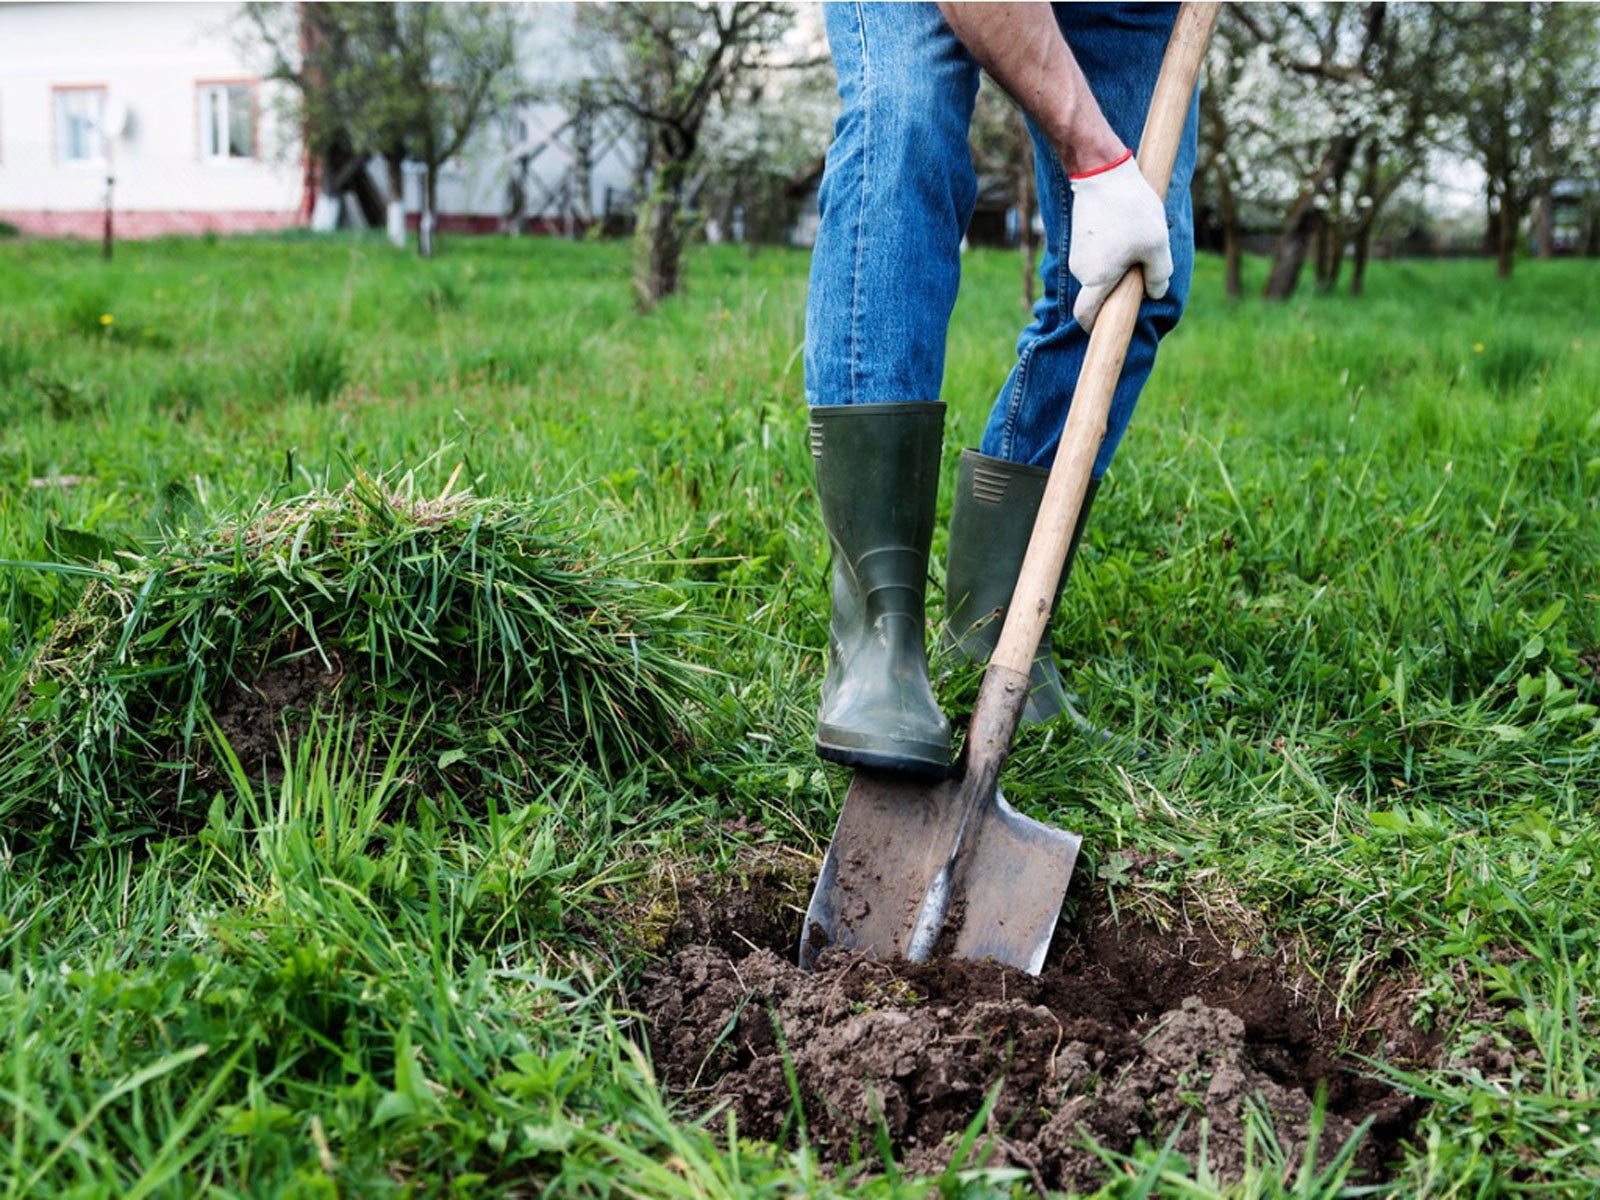 Stretches and exercises to make the most of your gardening workout